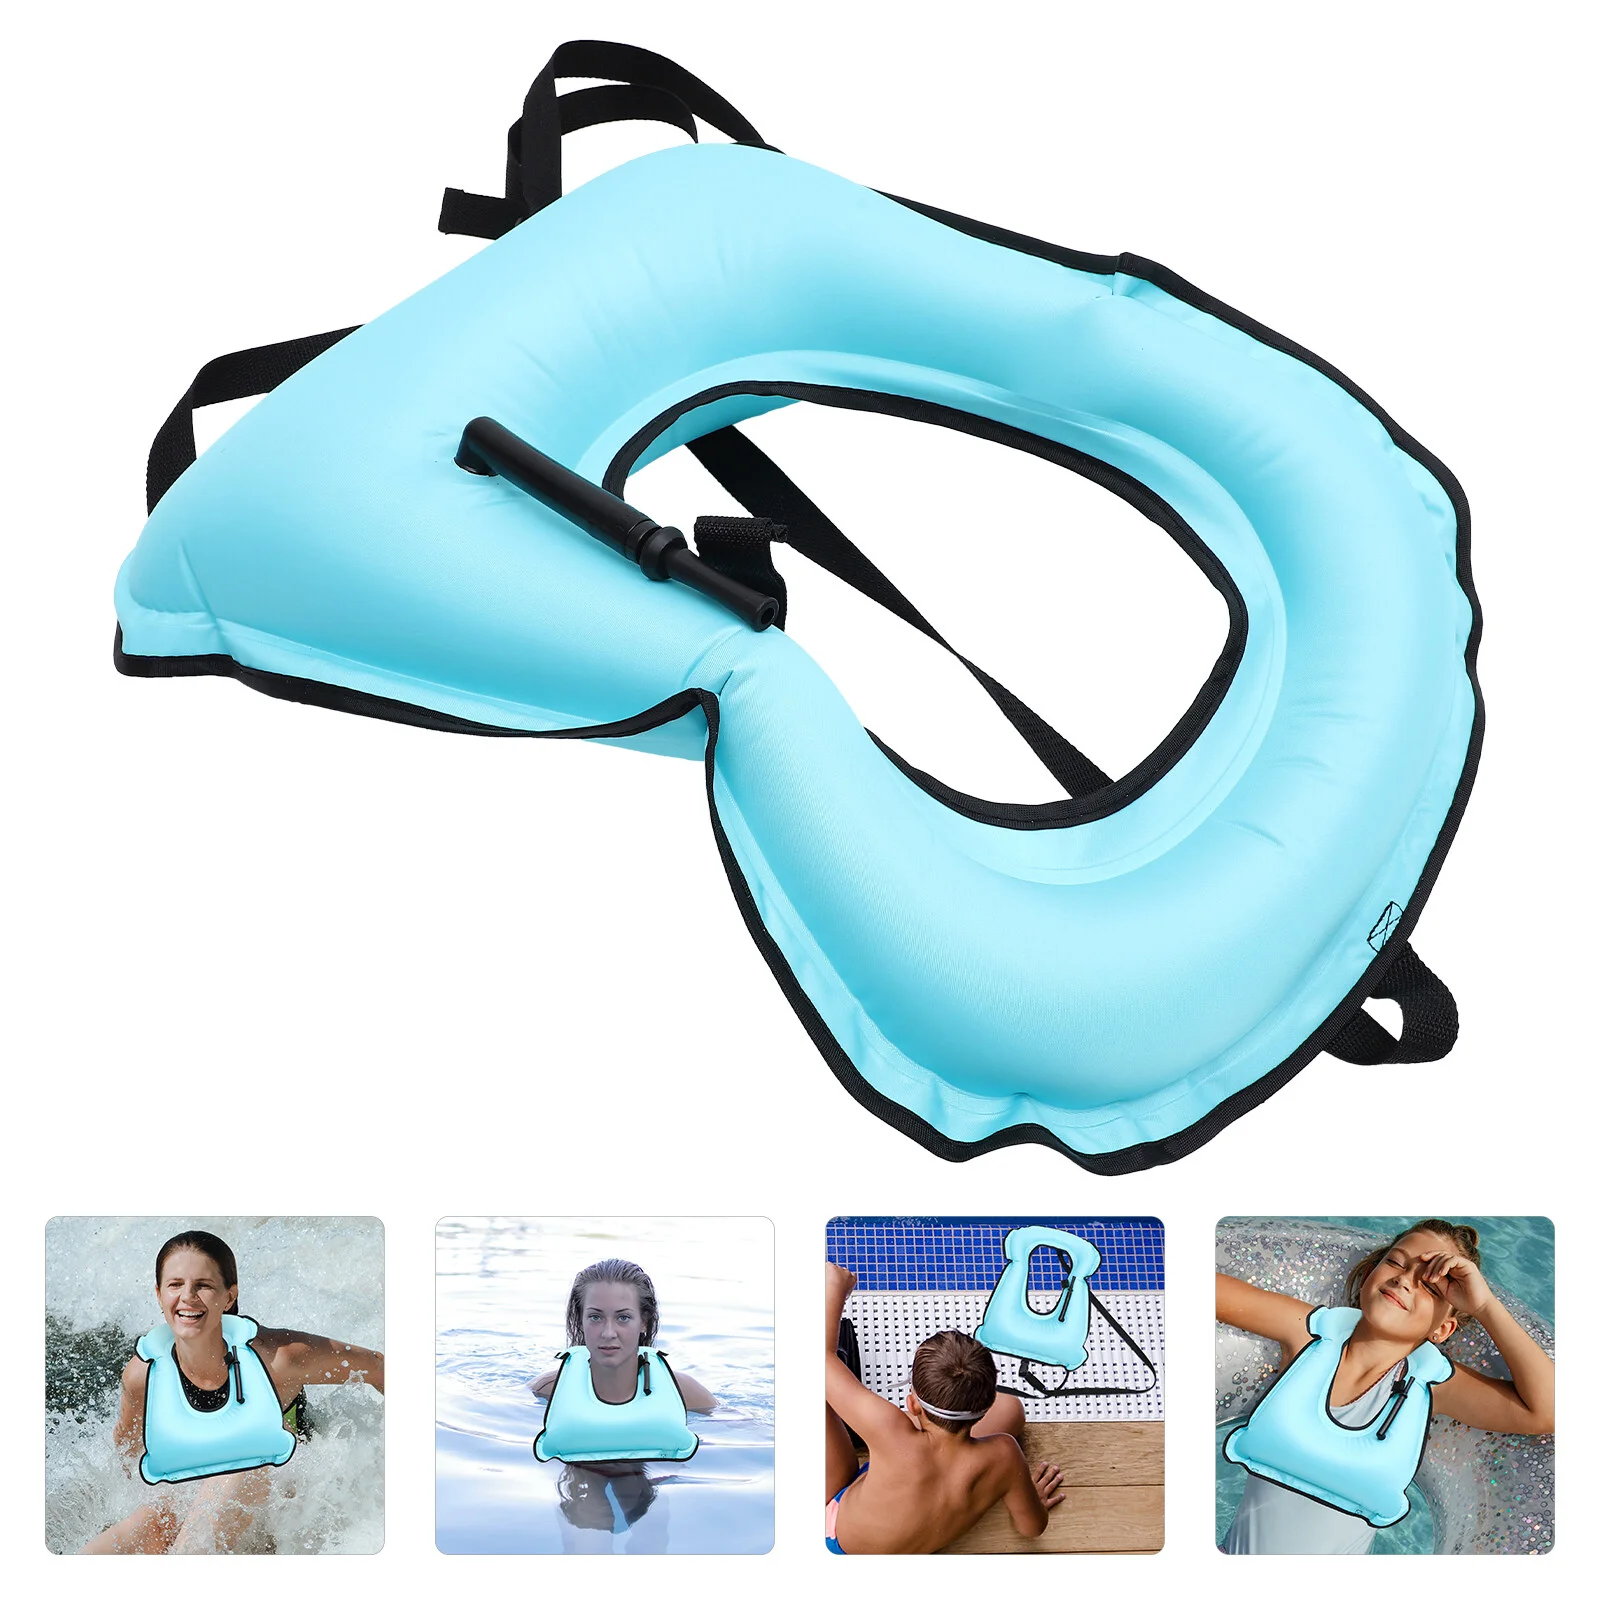 

Accessories Kids Life Jackets Snorkel Vest Vests Snorkeling Safety Accessory Pvc Inflatable Child Adults